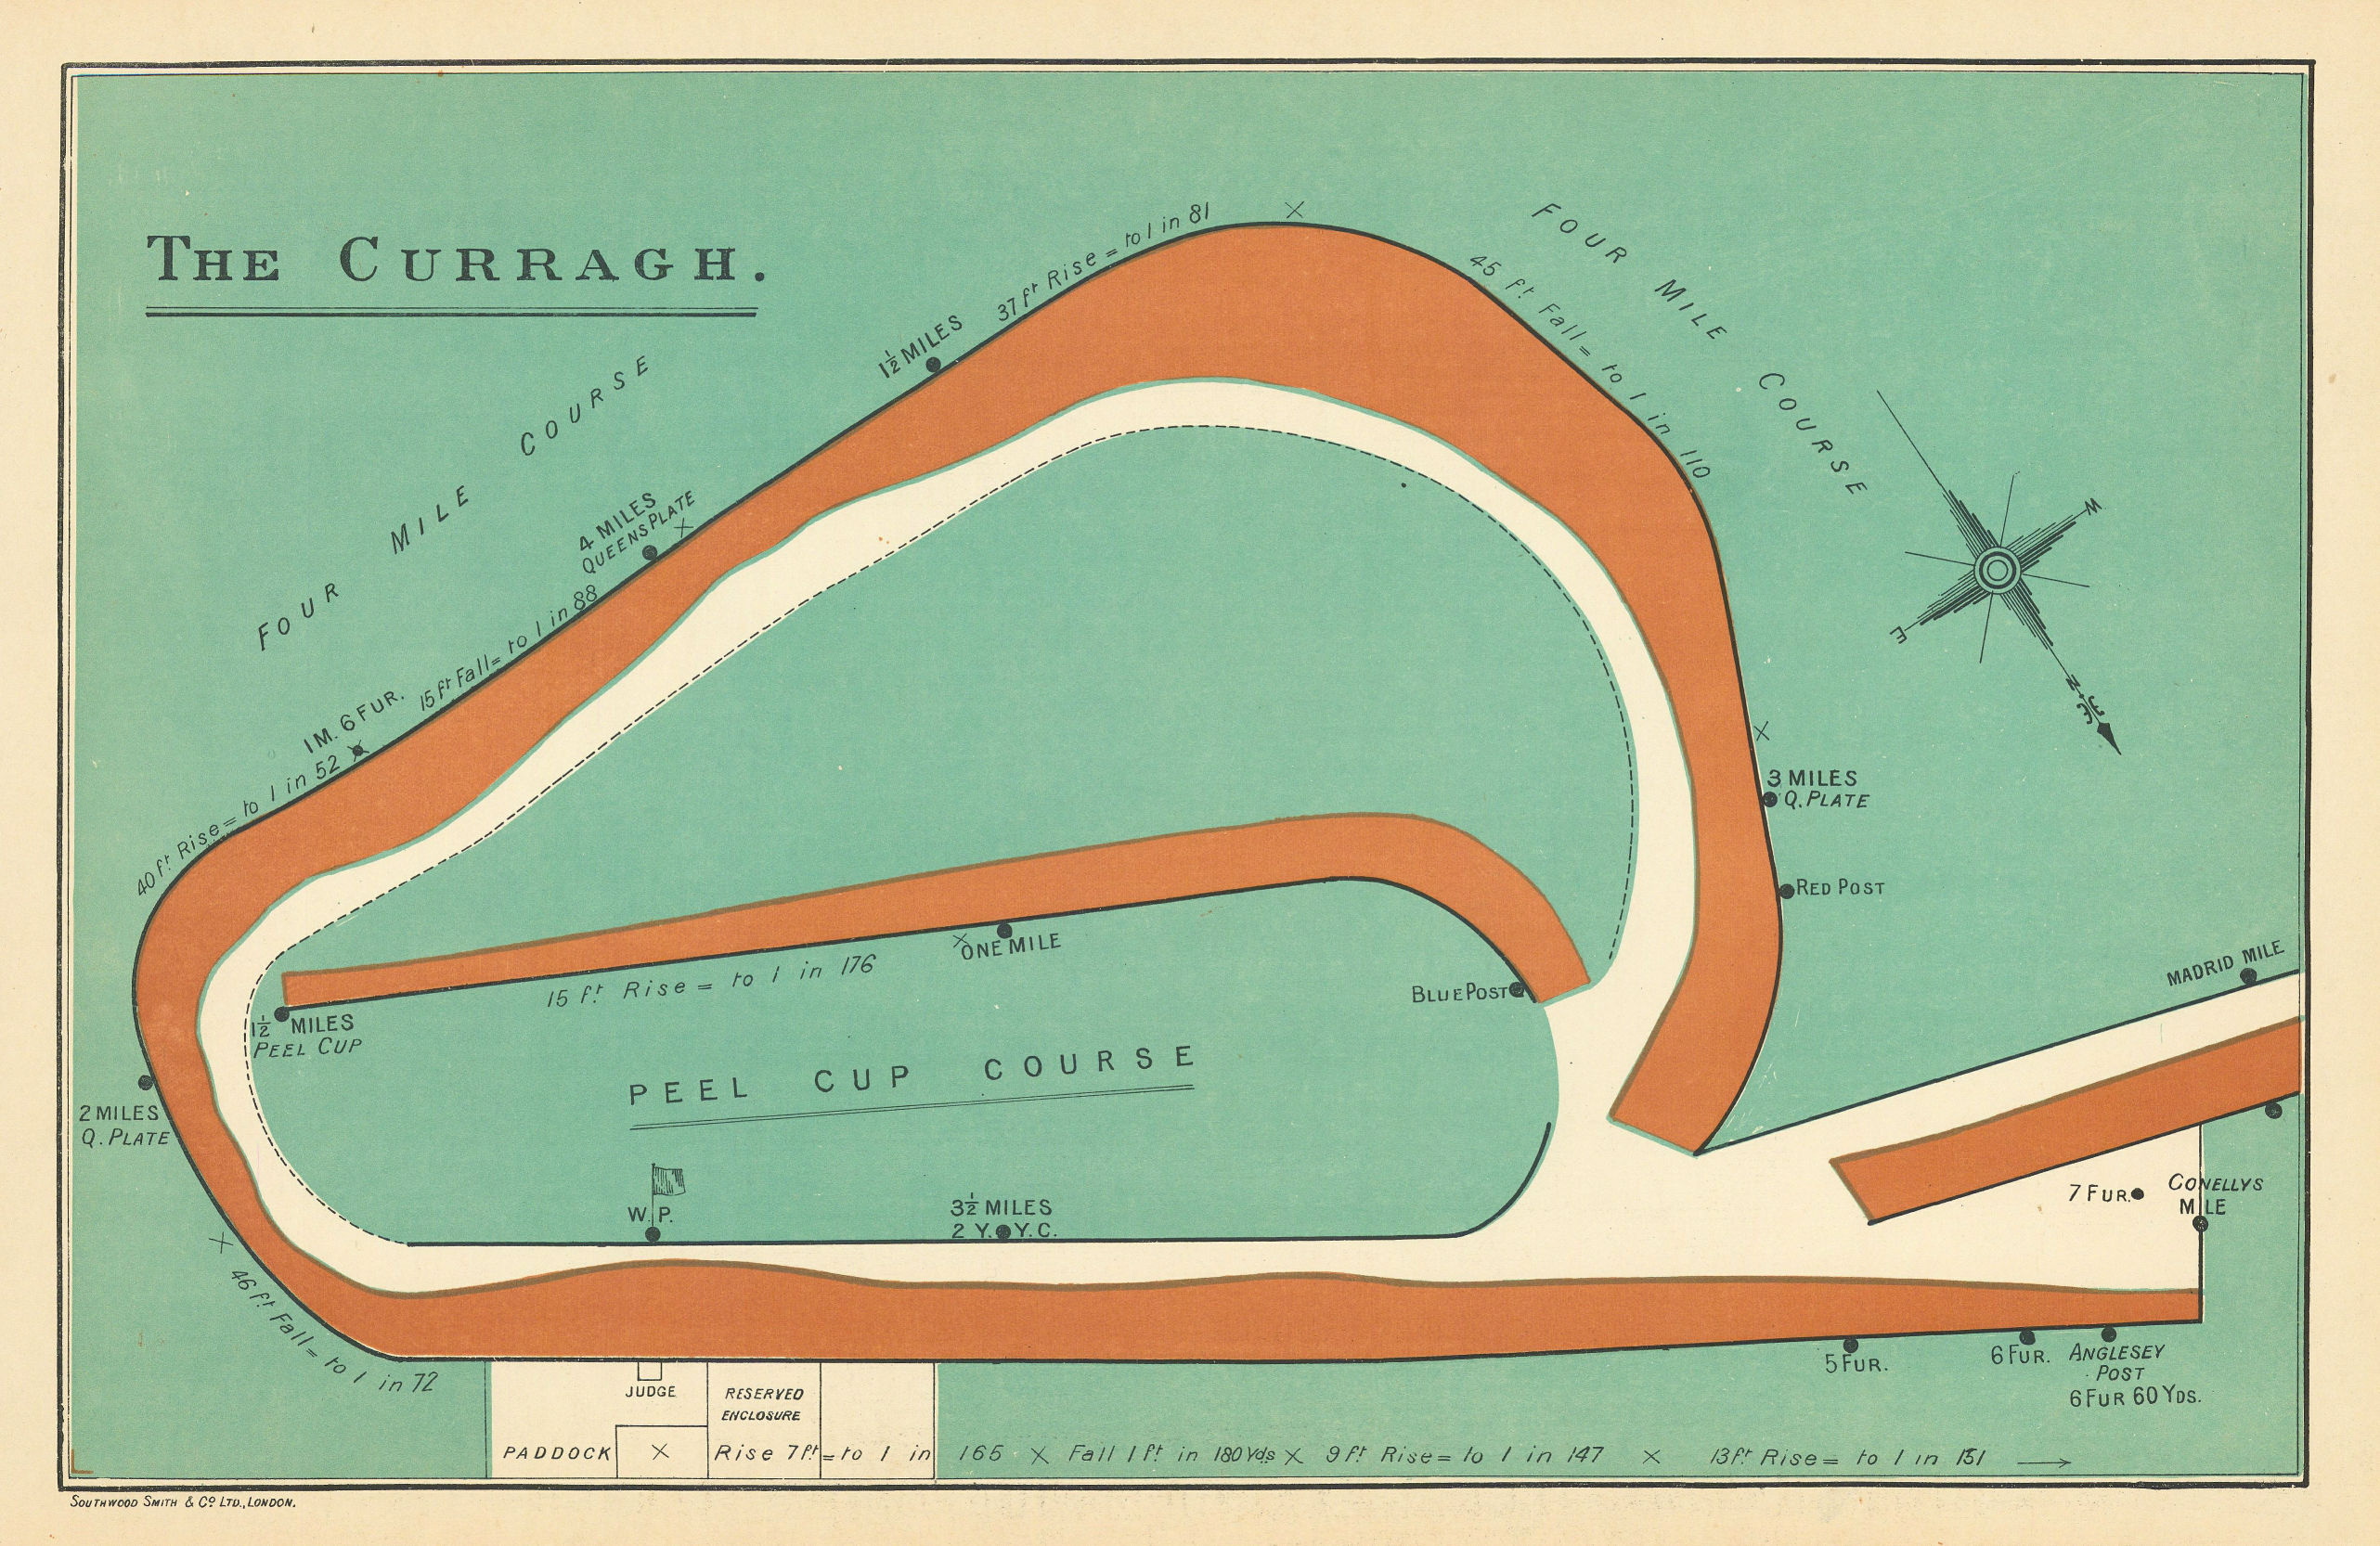 Associate Product The Curragh racecourse, Ireland. Peel Cup course. BAYLES 1903 old antique map